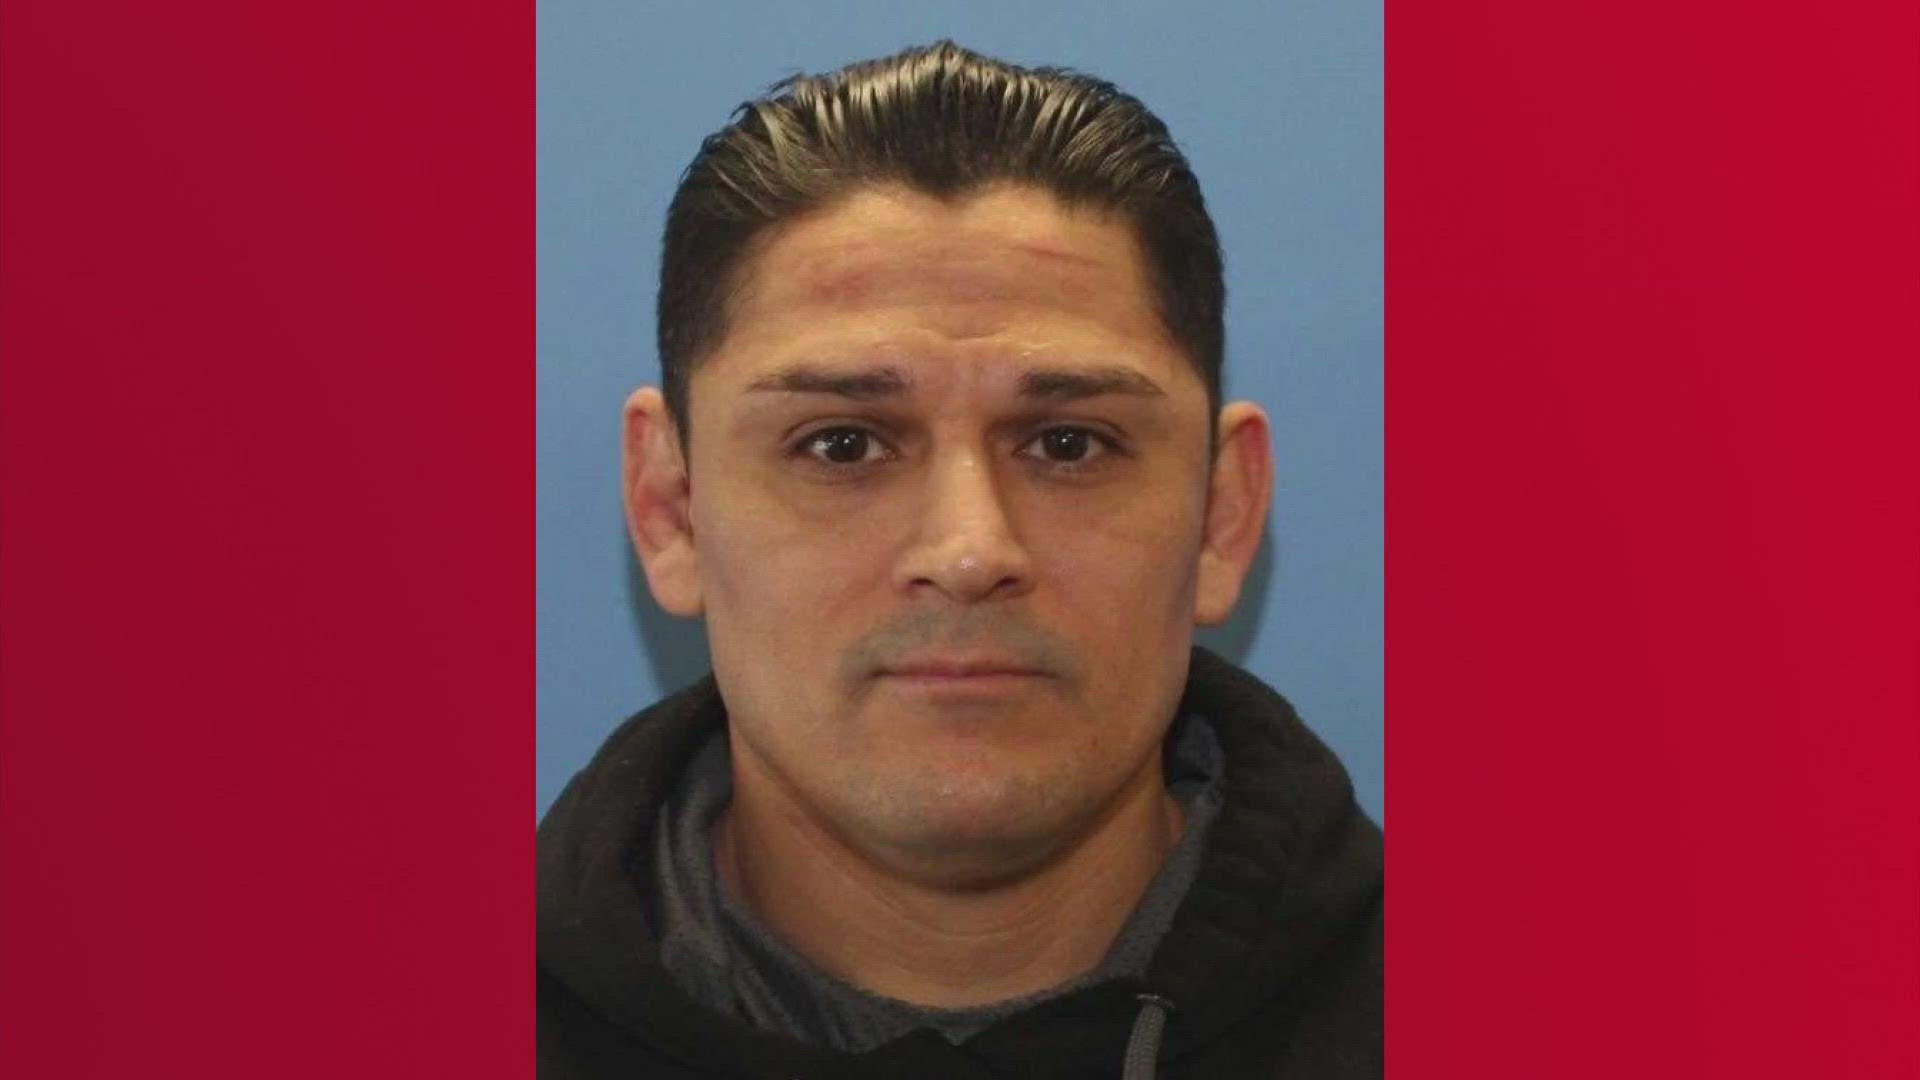 Elias Huizar is believed to have killed two people and abducted a 1-year-old.